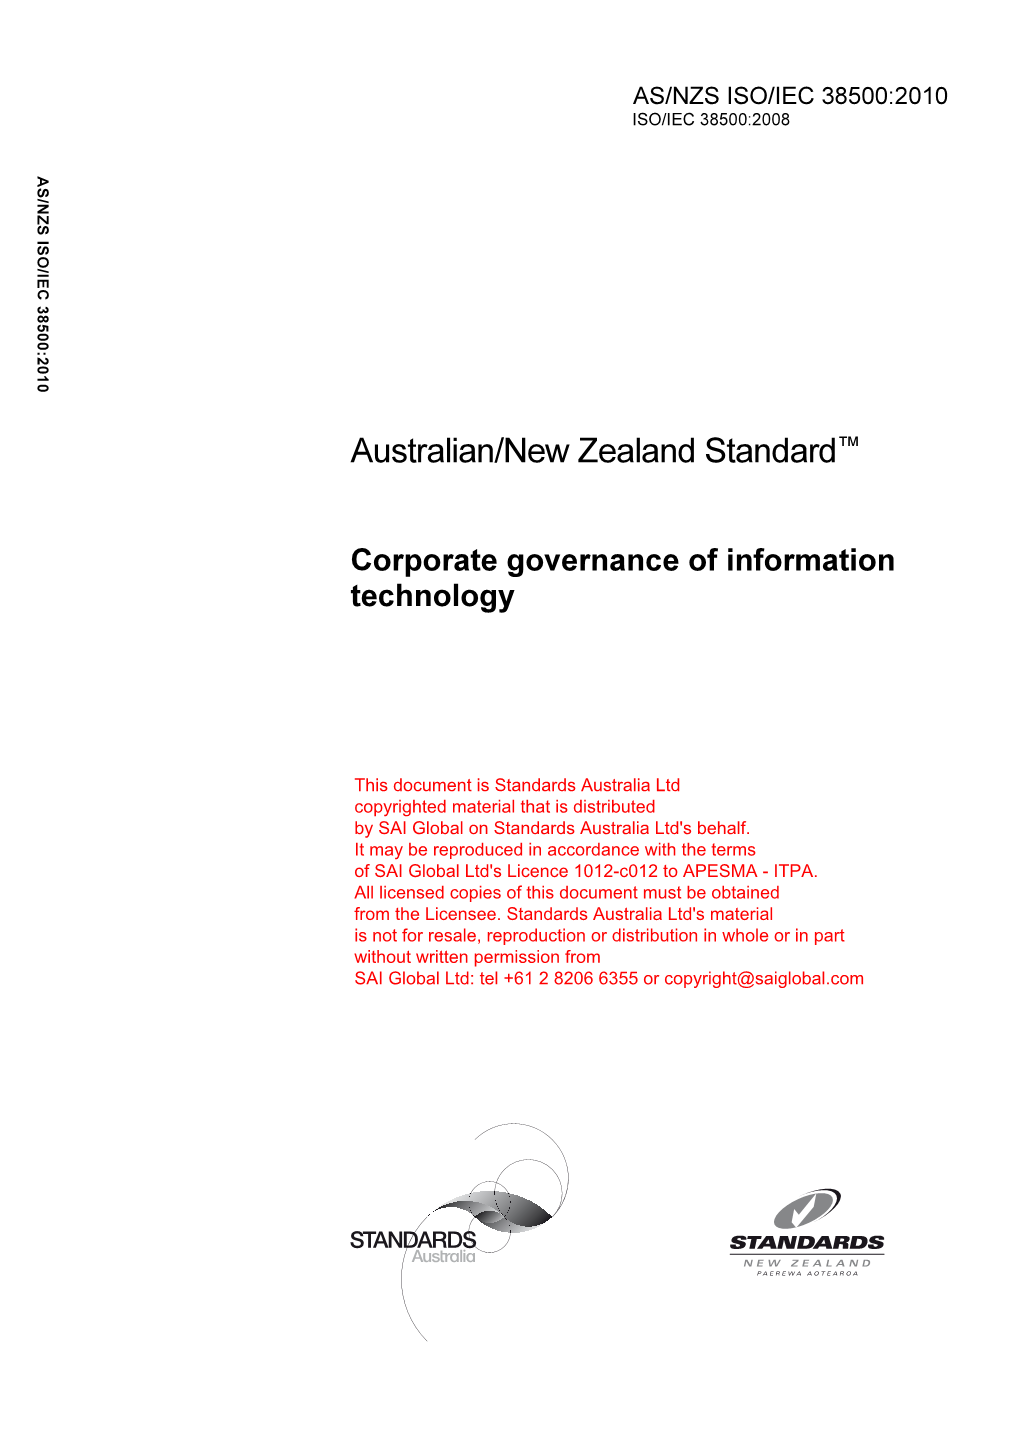 AS/NZS ISO/IEC 38500:2010 Corporate Governance of Information Technology